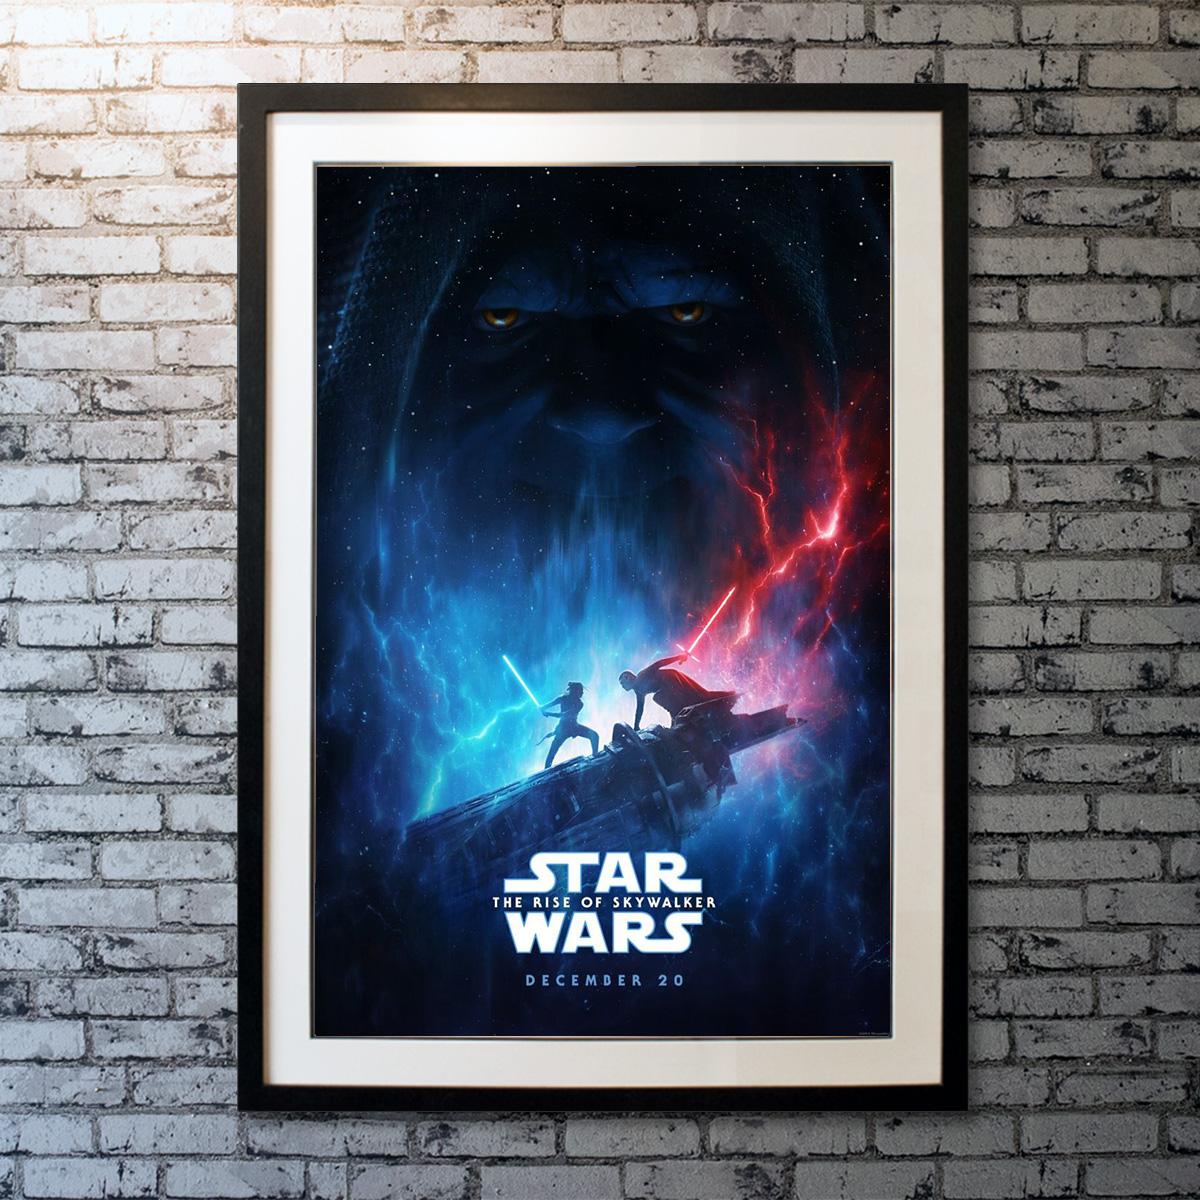 STAR WARS: THE RISE OF SKYWALKER - 2nd Advance Teaser, double-sided & Unfolded US One Sheet. The surviving Resistance faces the First Order once more as Rey, Finn and Poe Dameron's journey continues. With the power and knowledge of generations